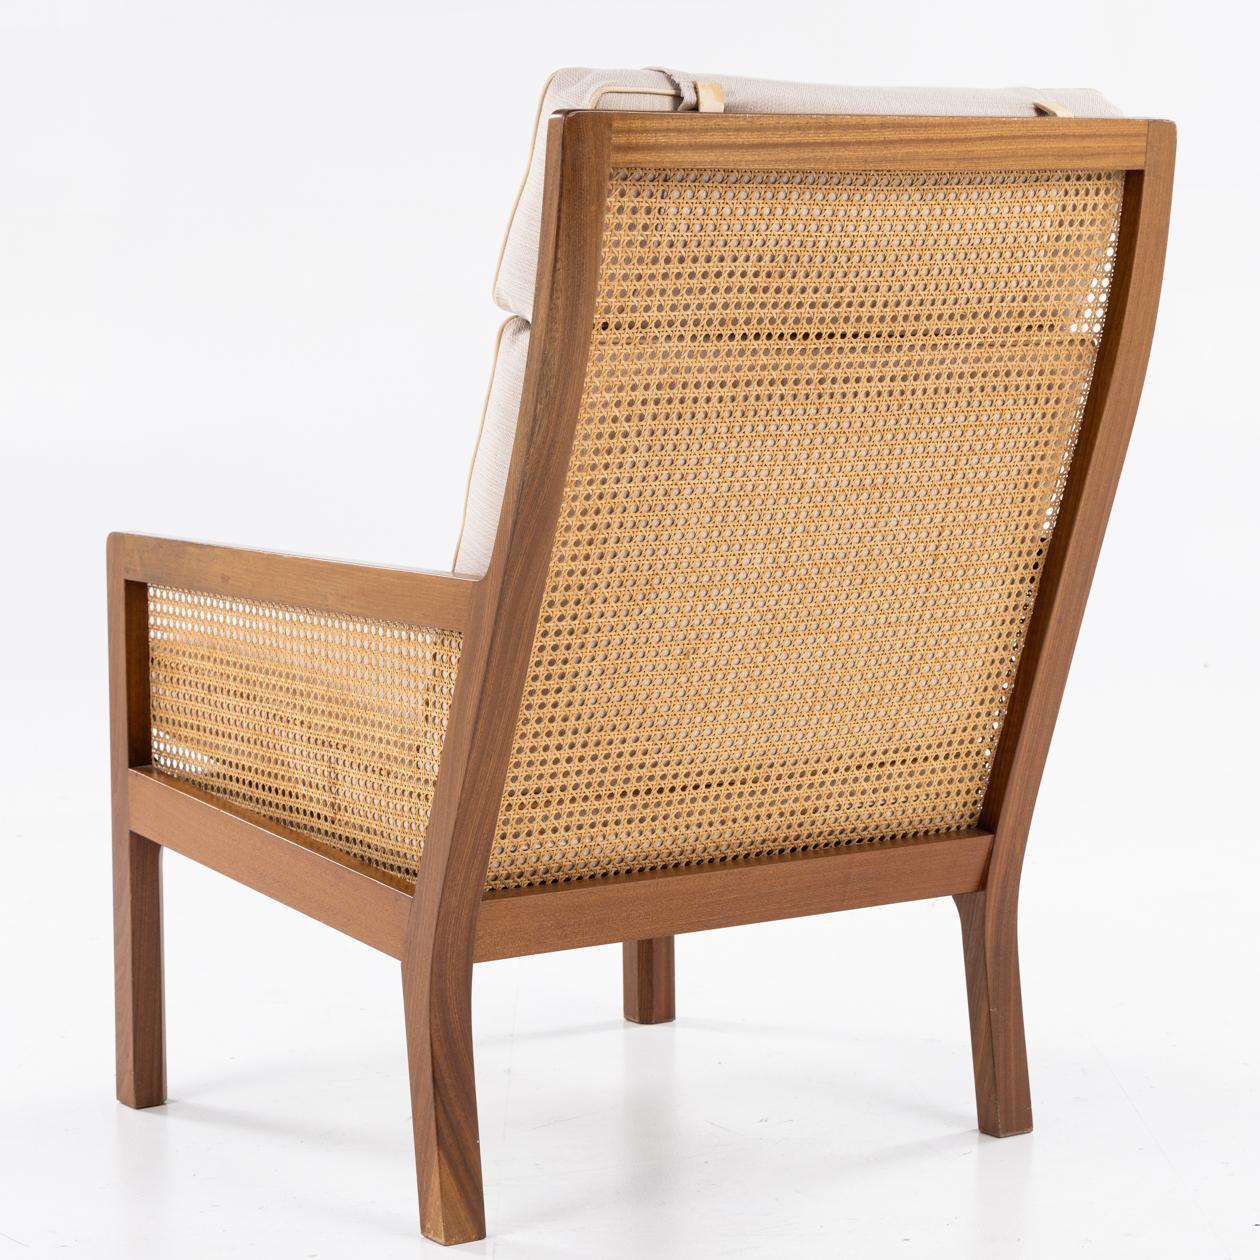 Easy chair in mahogany w. French cane and newer cushions in light textile. Bernt Petersen / Wørts Møbelsnedkeri